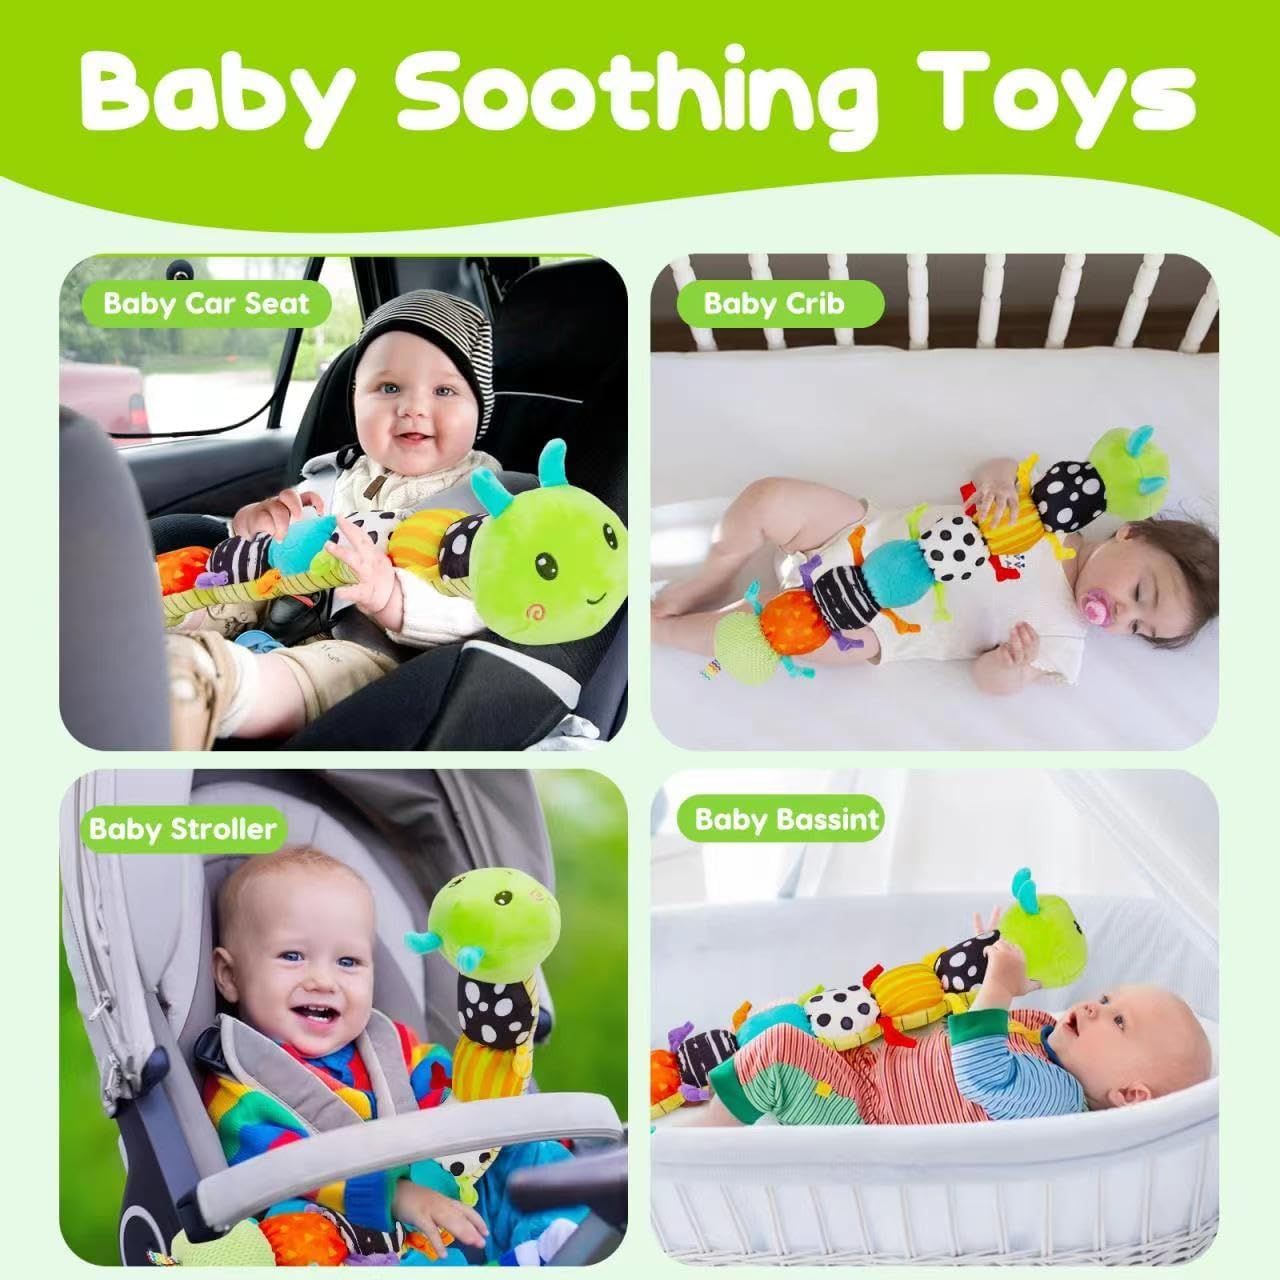 Baby Sensory Toys 0 6 Months Musical